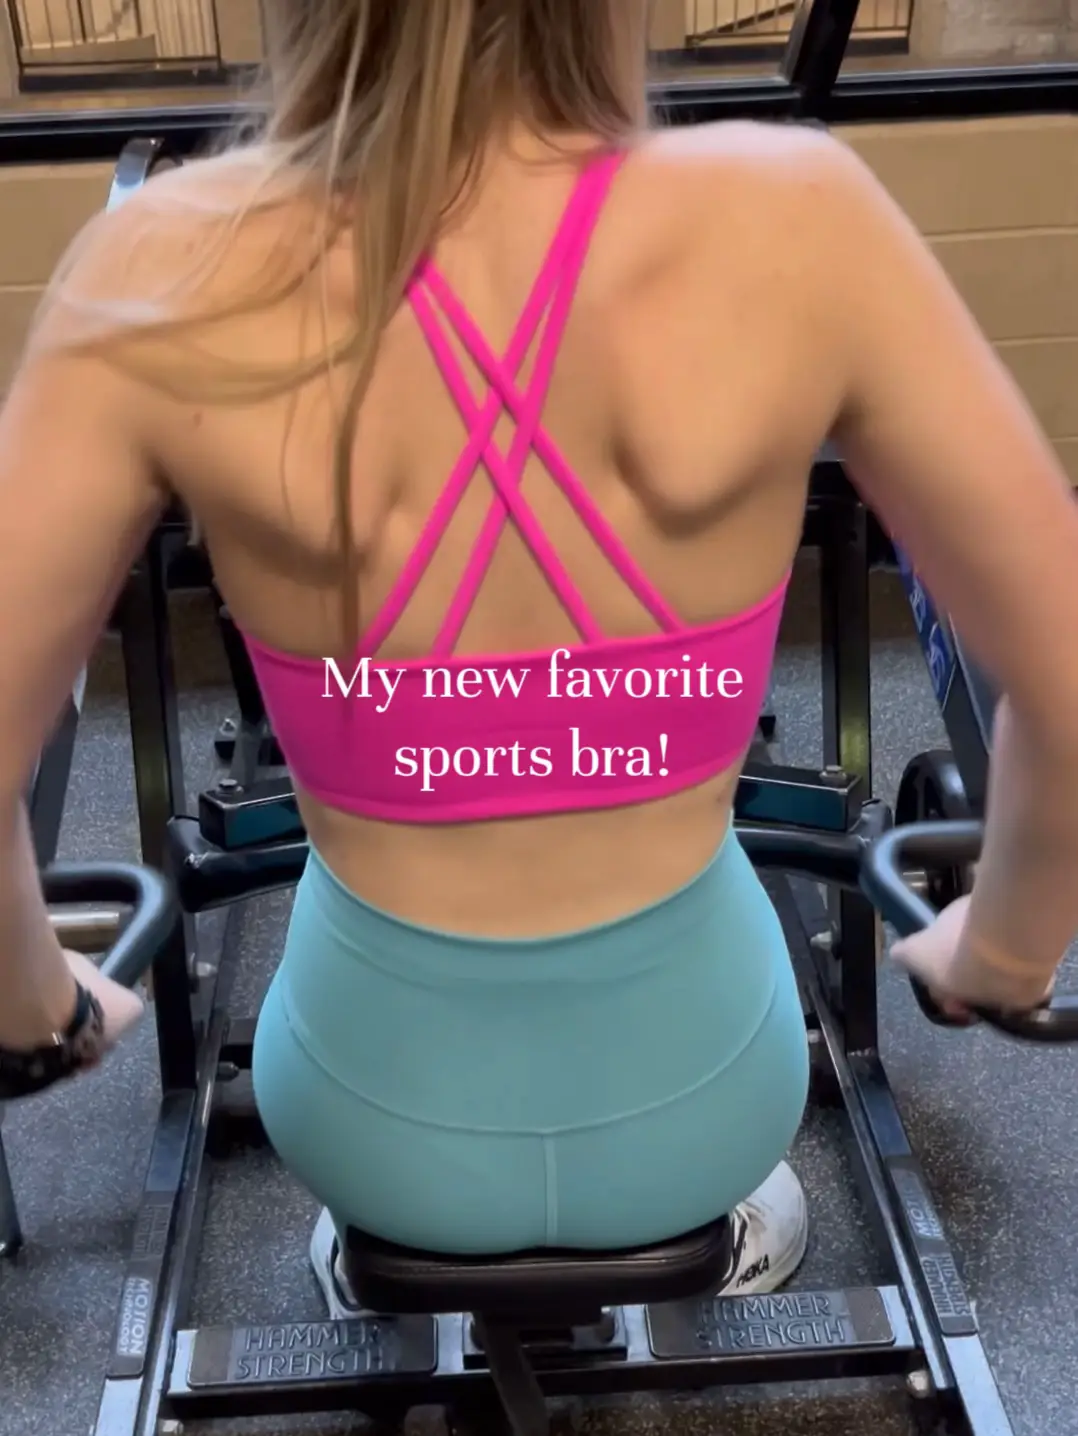 High support affordable sports bras on amaz0n! #sportsbra #sportsbras , high impact sports bar